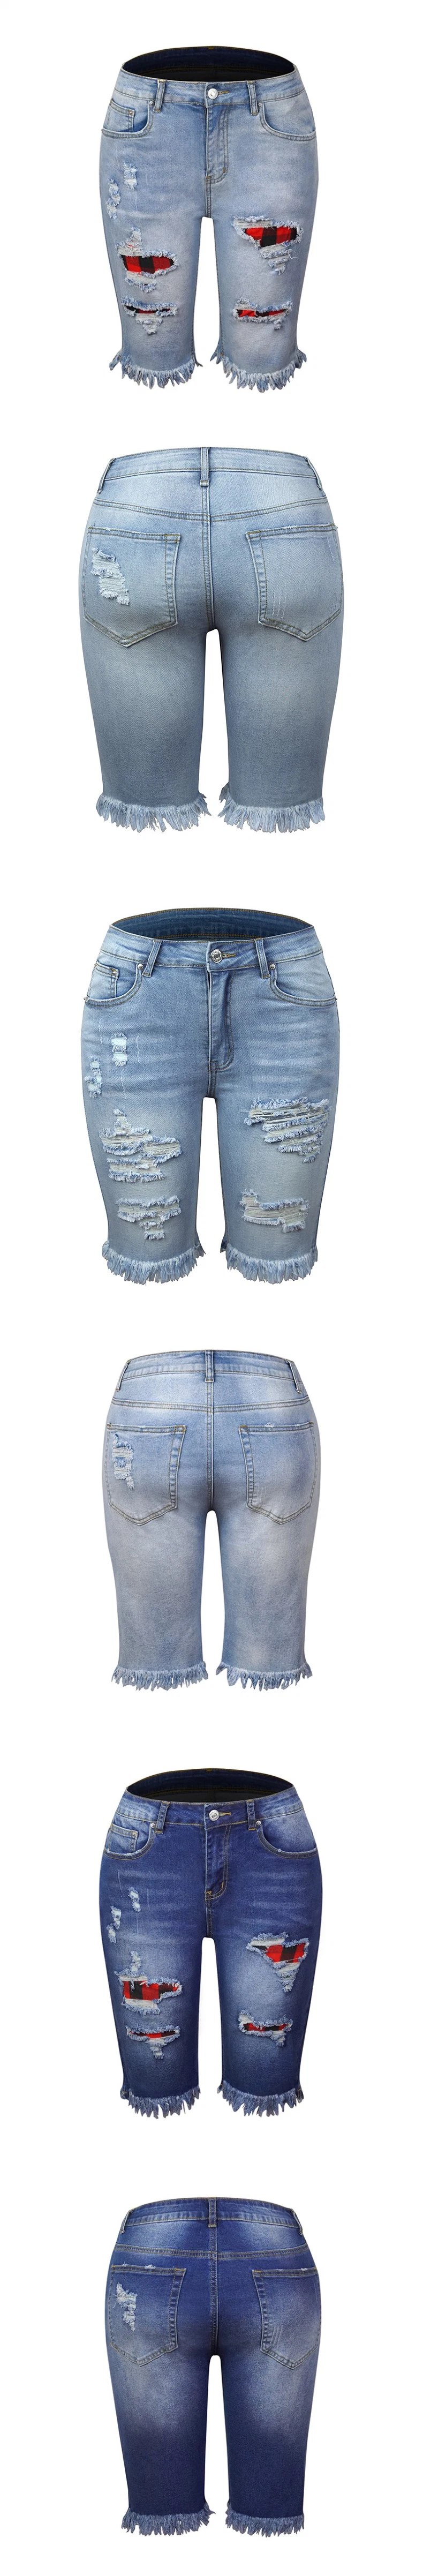 Summer Street Fringed High Elastic Pencil Pants MID-Waist Five-Point Pants Ripped Female Super Hot Jeans